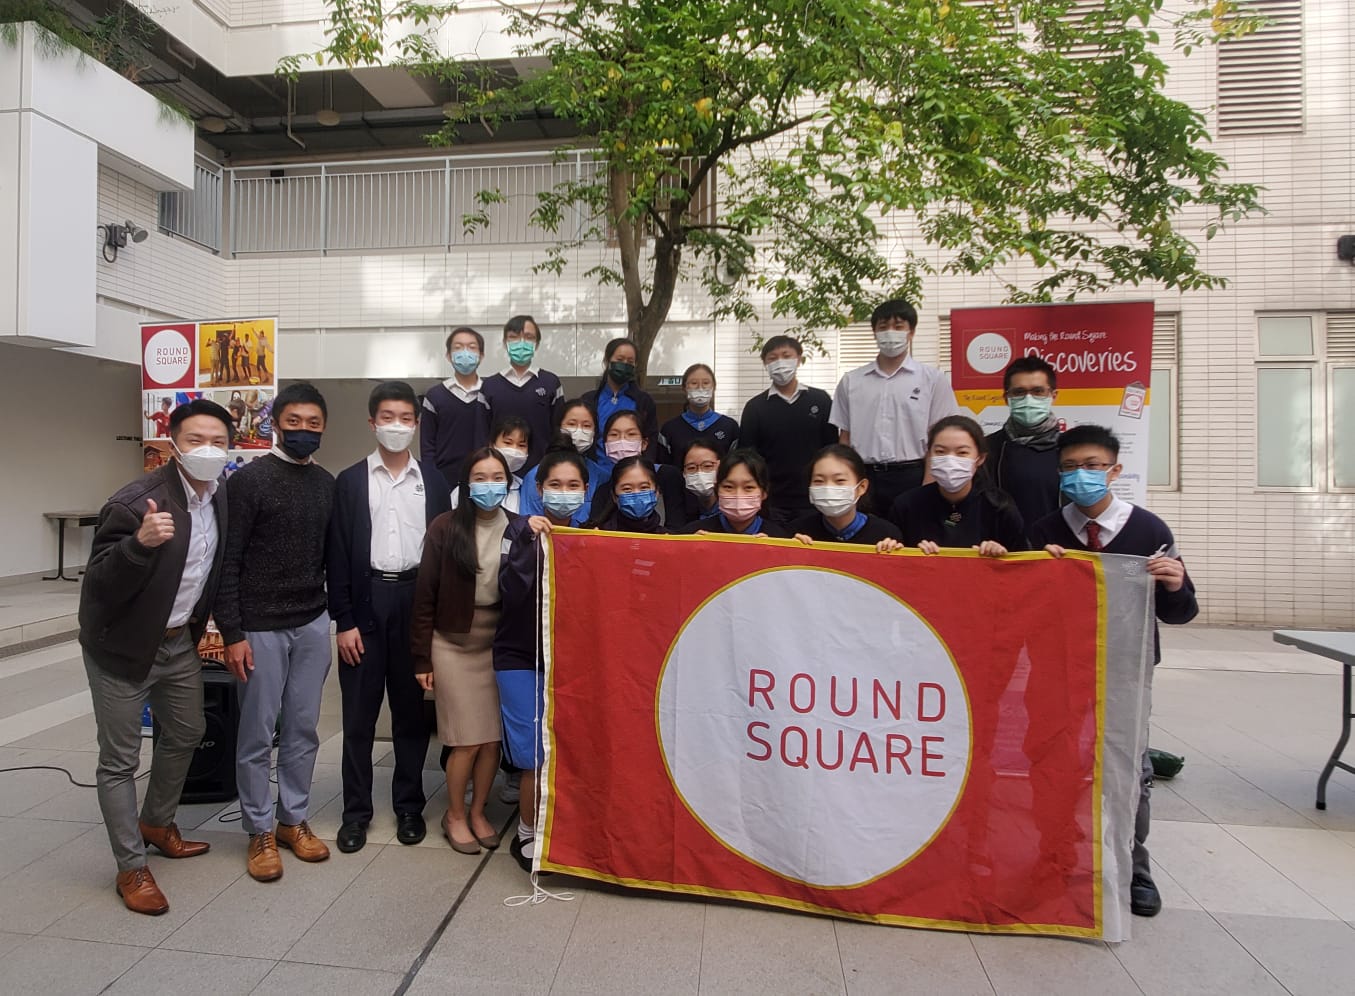 Teachers-in-charge and members of the Round Square Student Committee